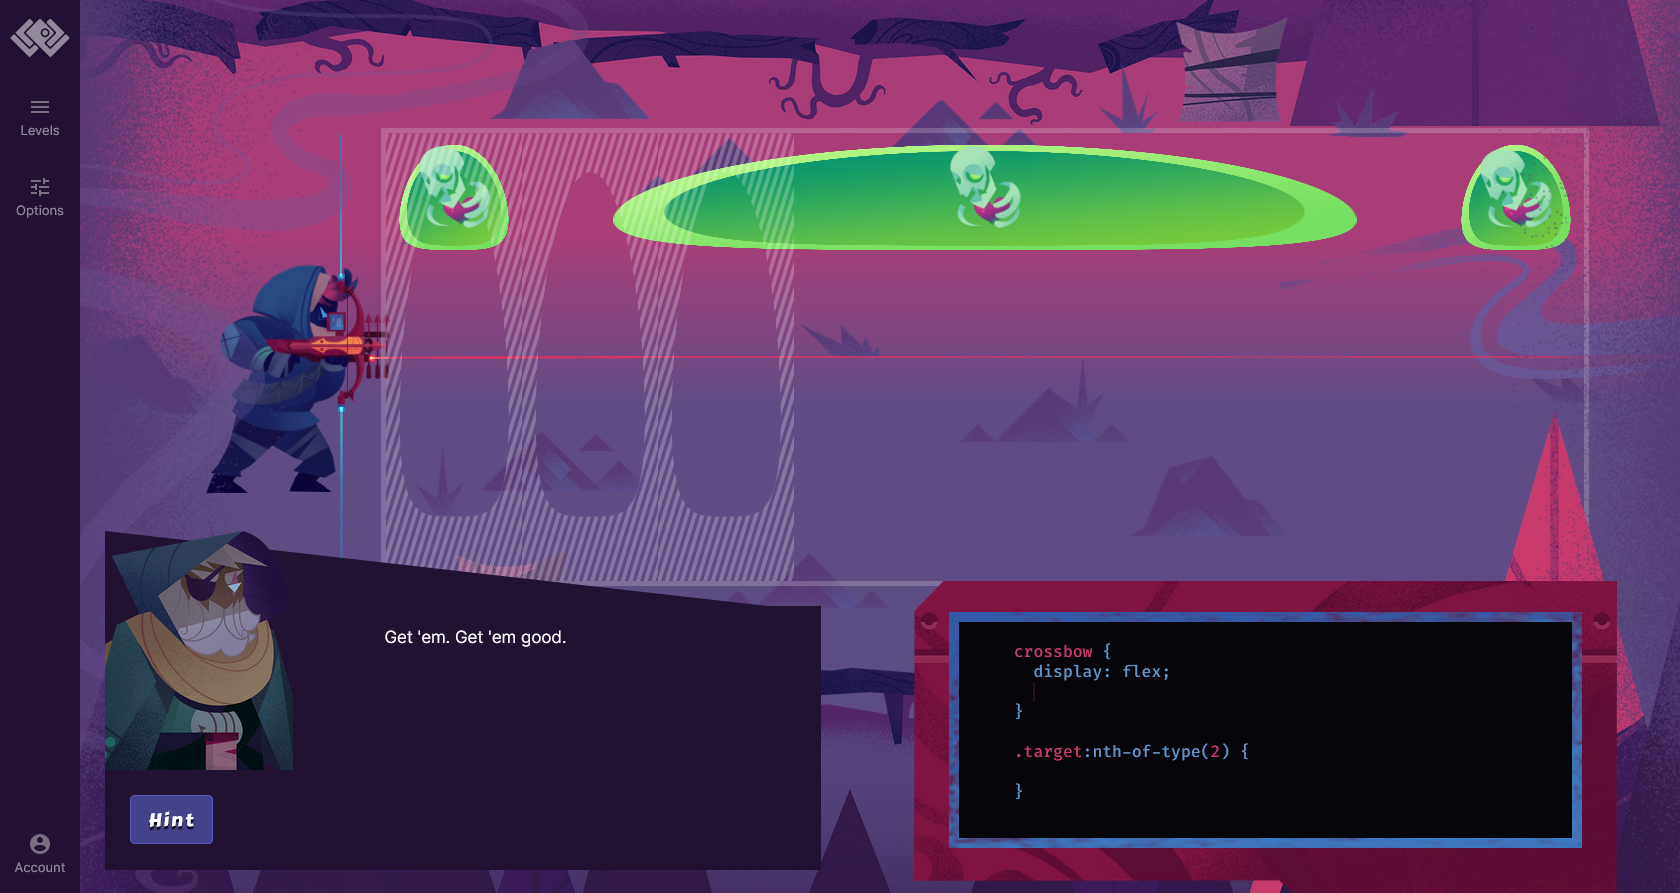 A screenshot from the online video game Flexbox Zombies